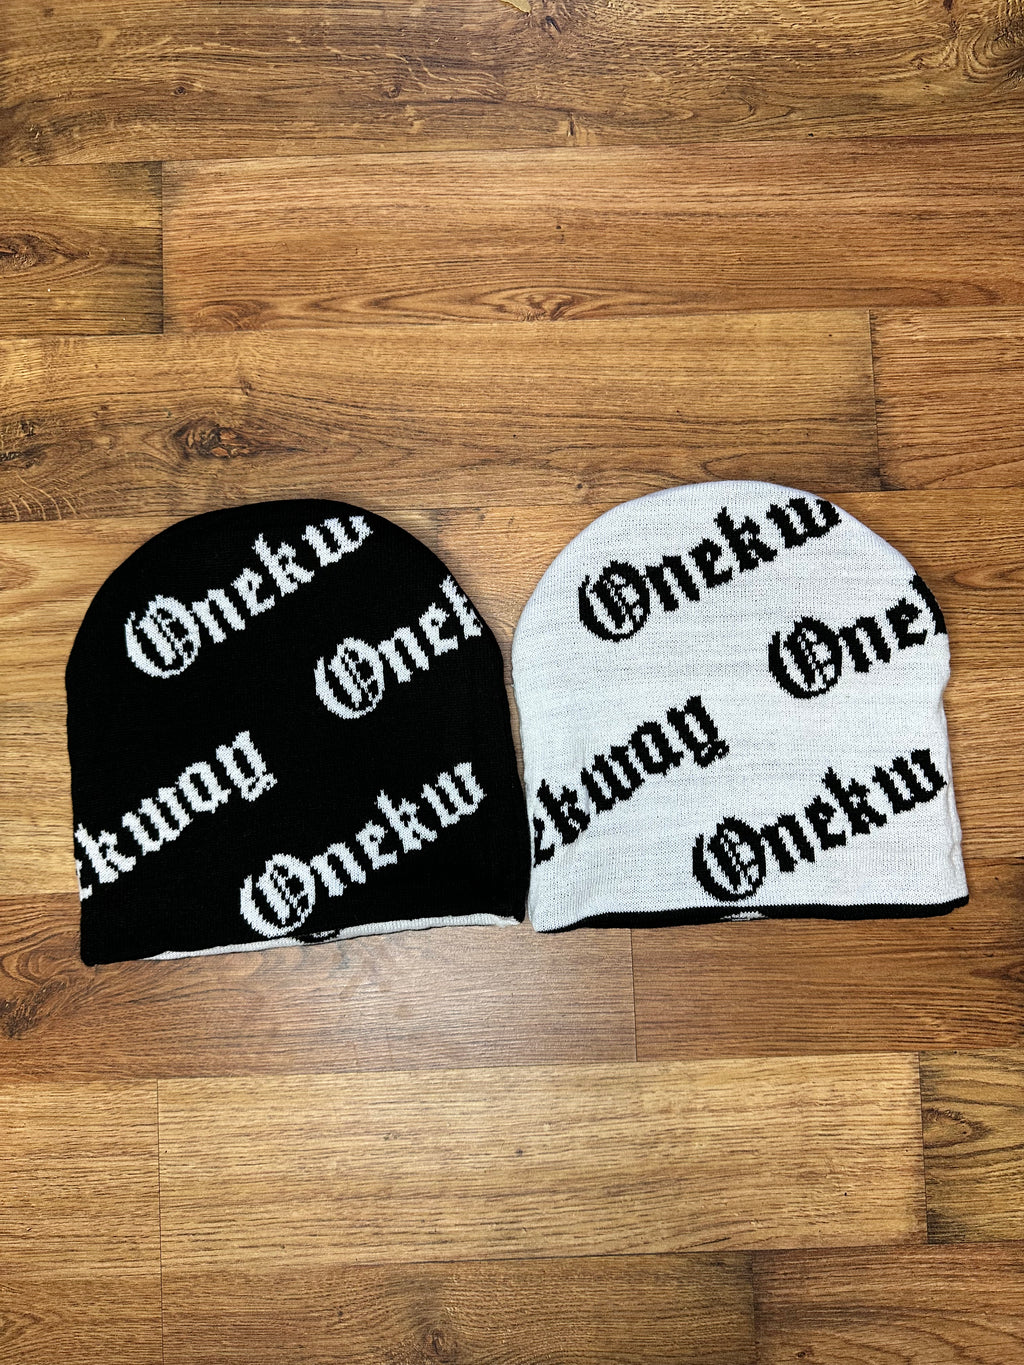 Black and White Reversible Beanies